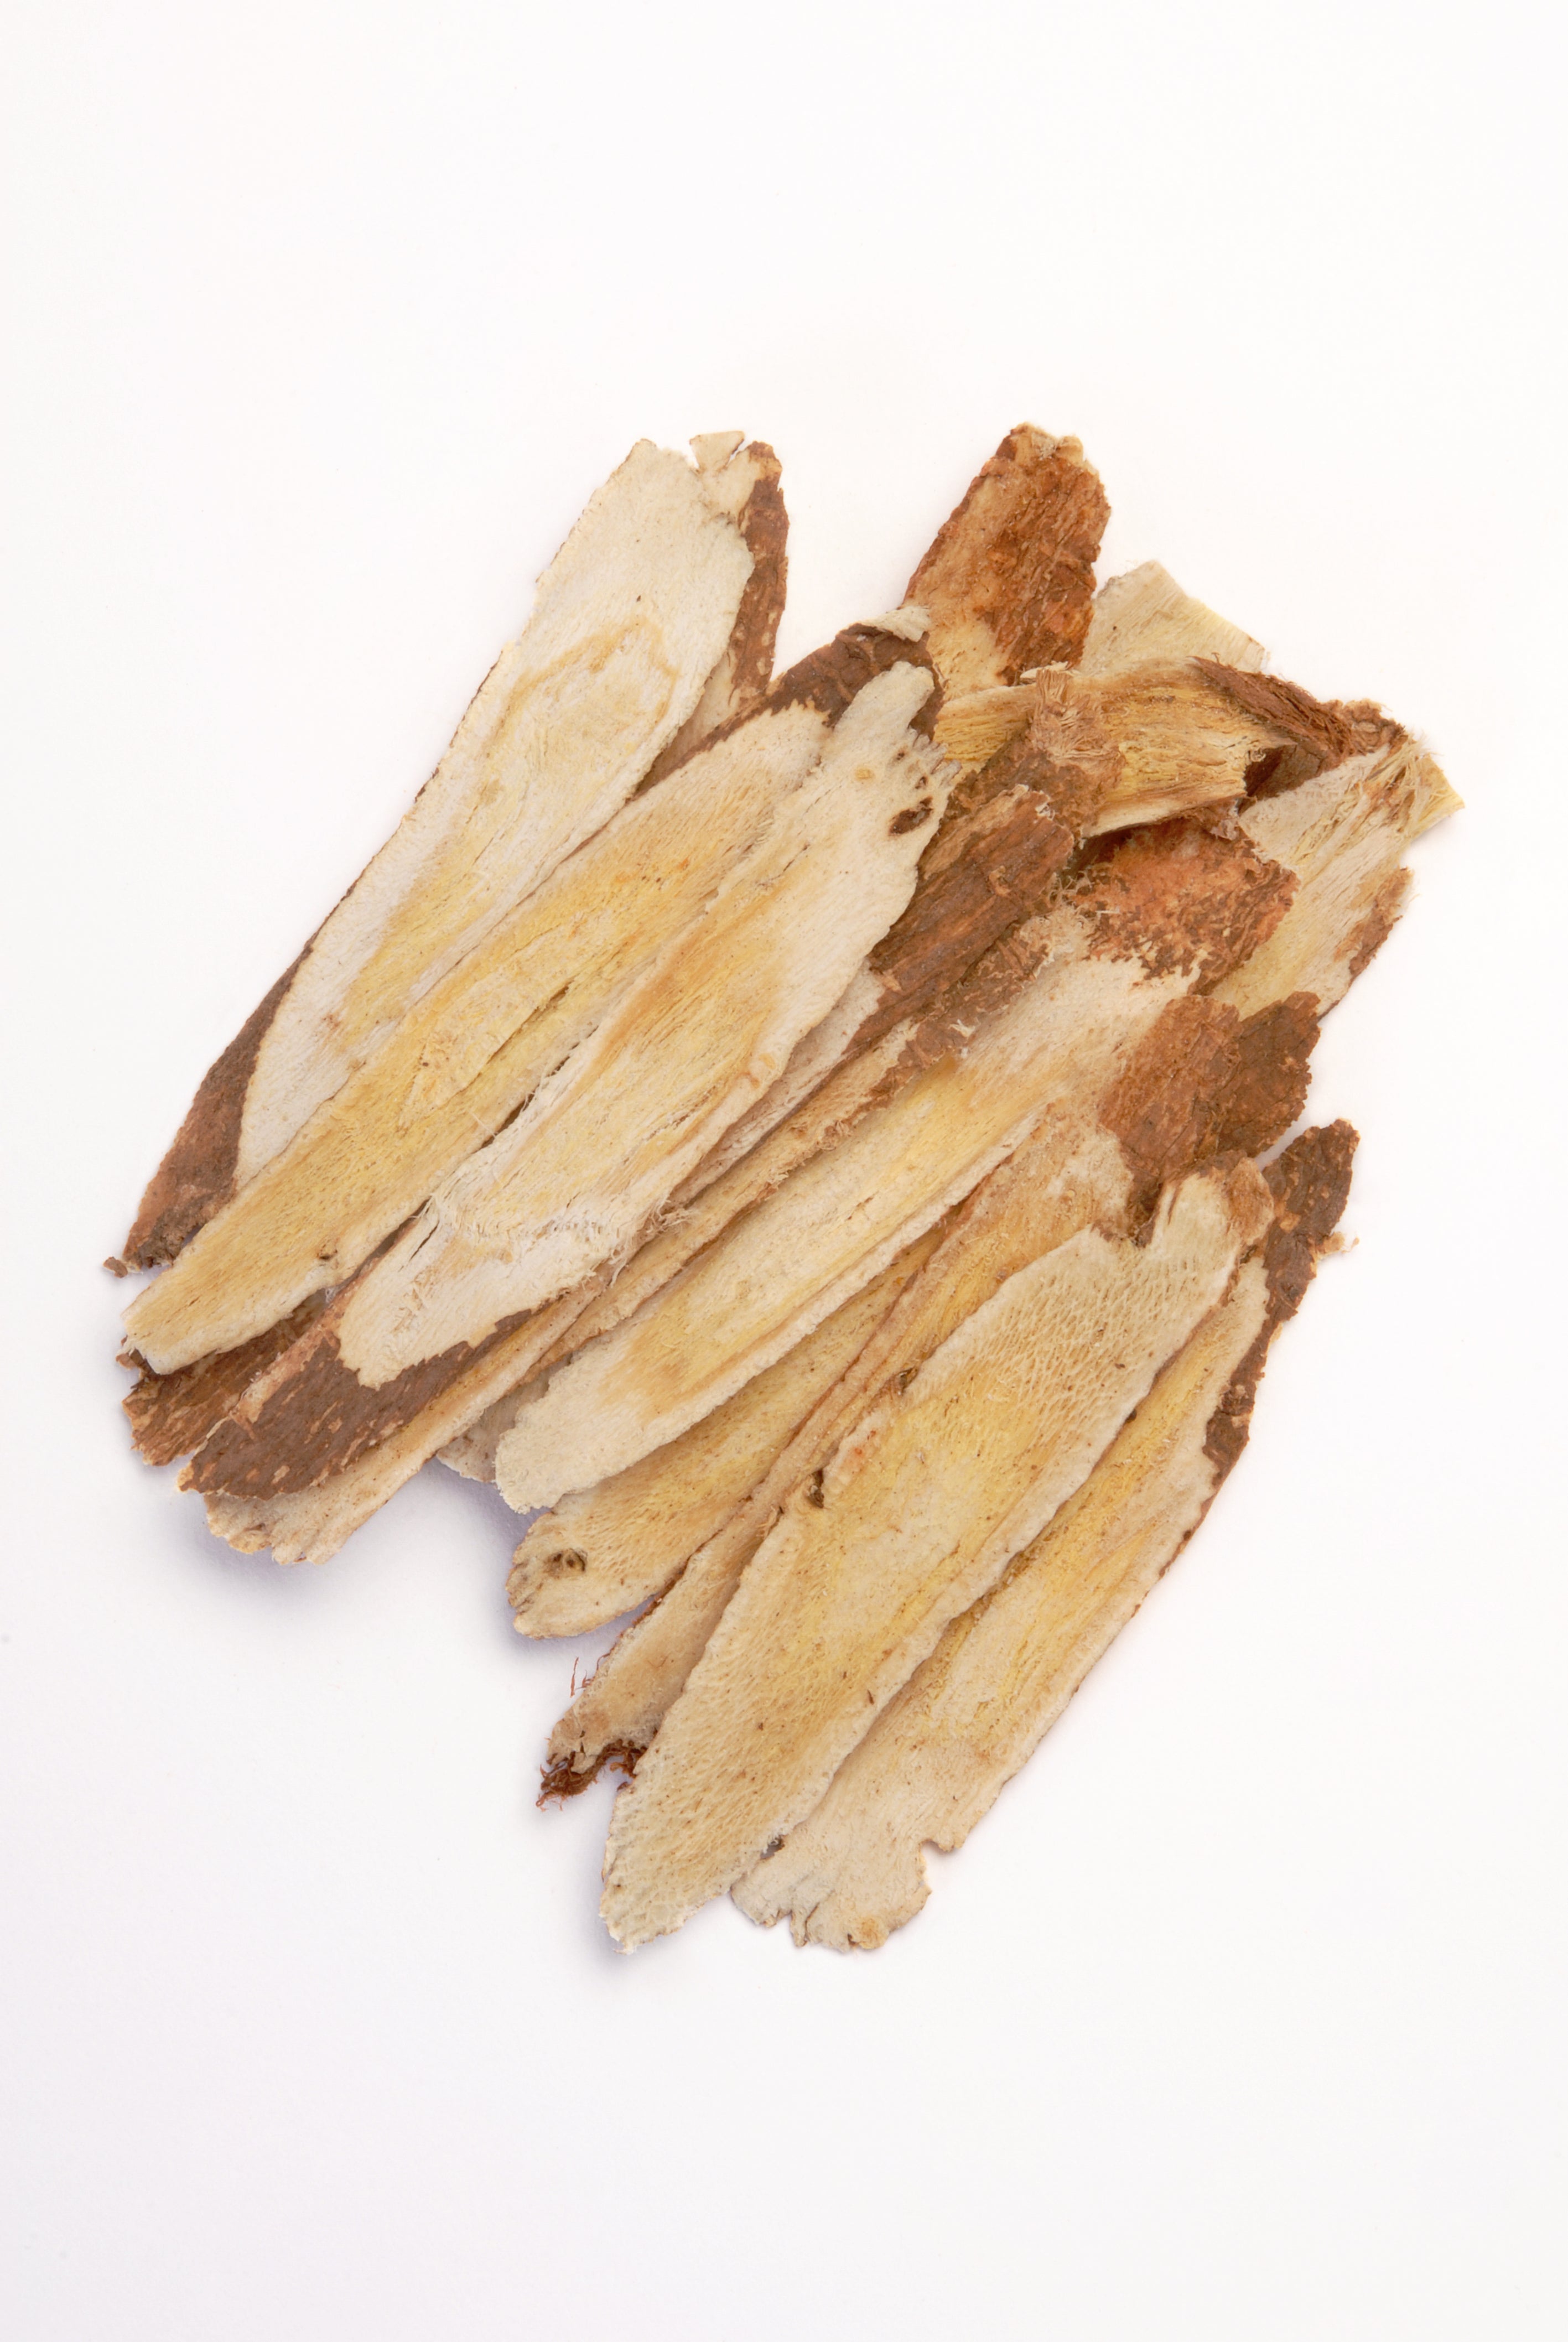 Slices of dried Astragalus